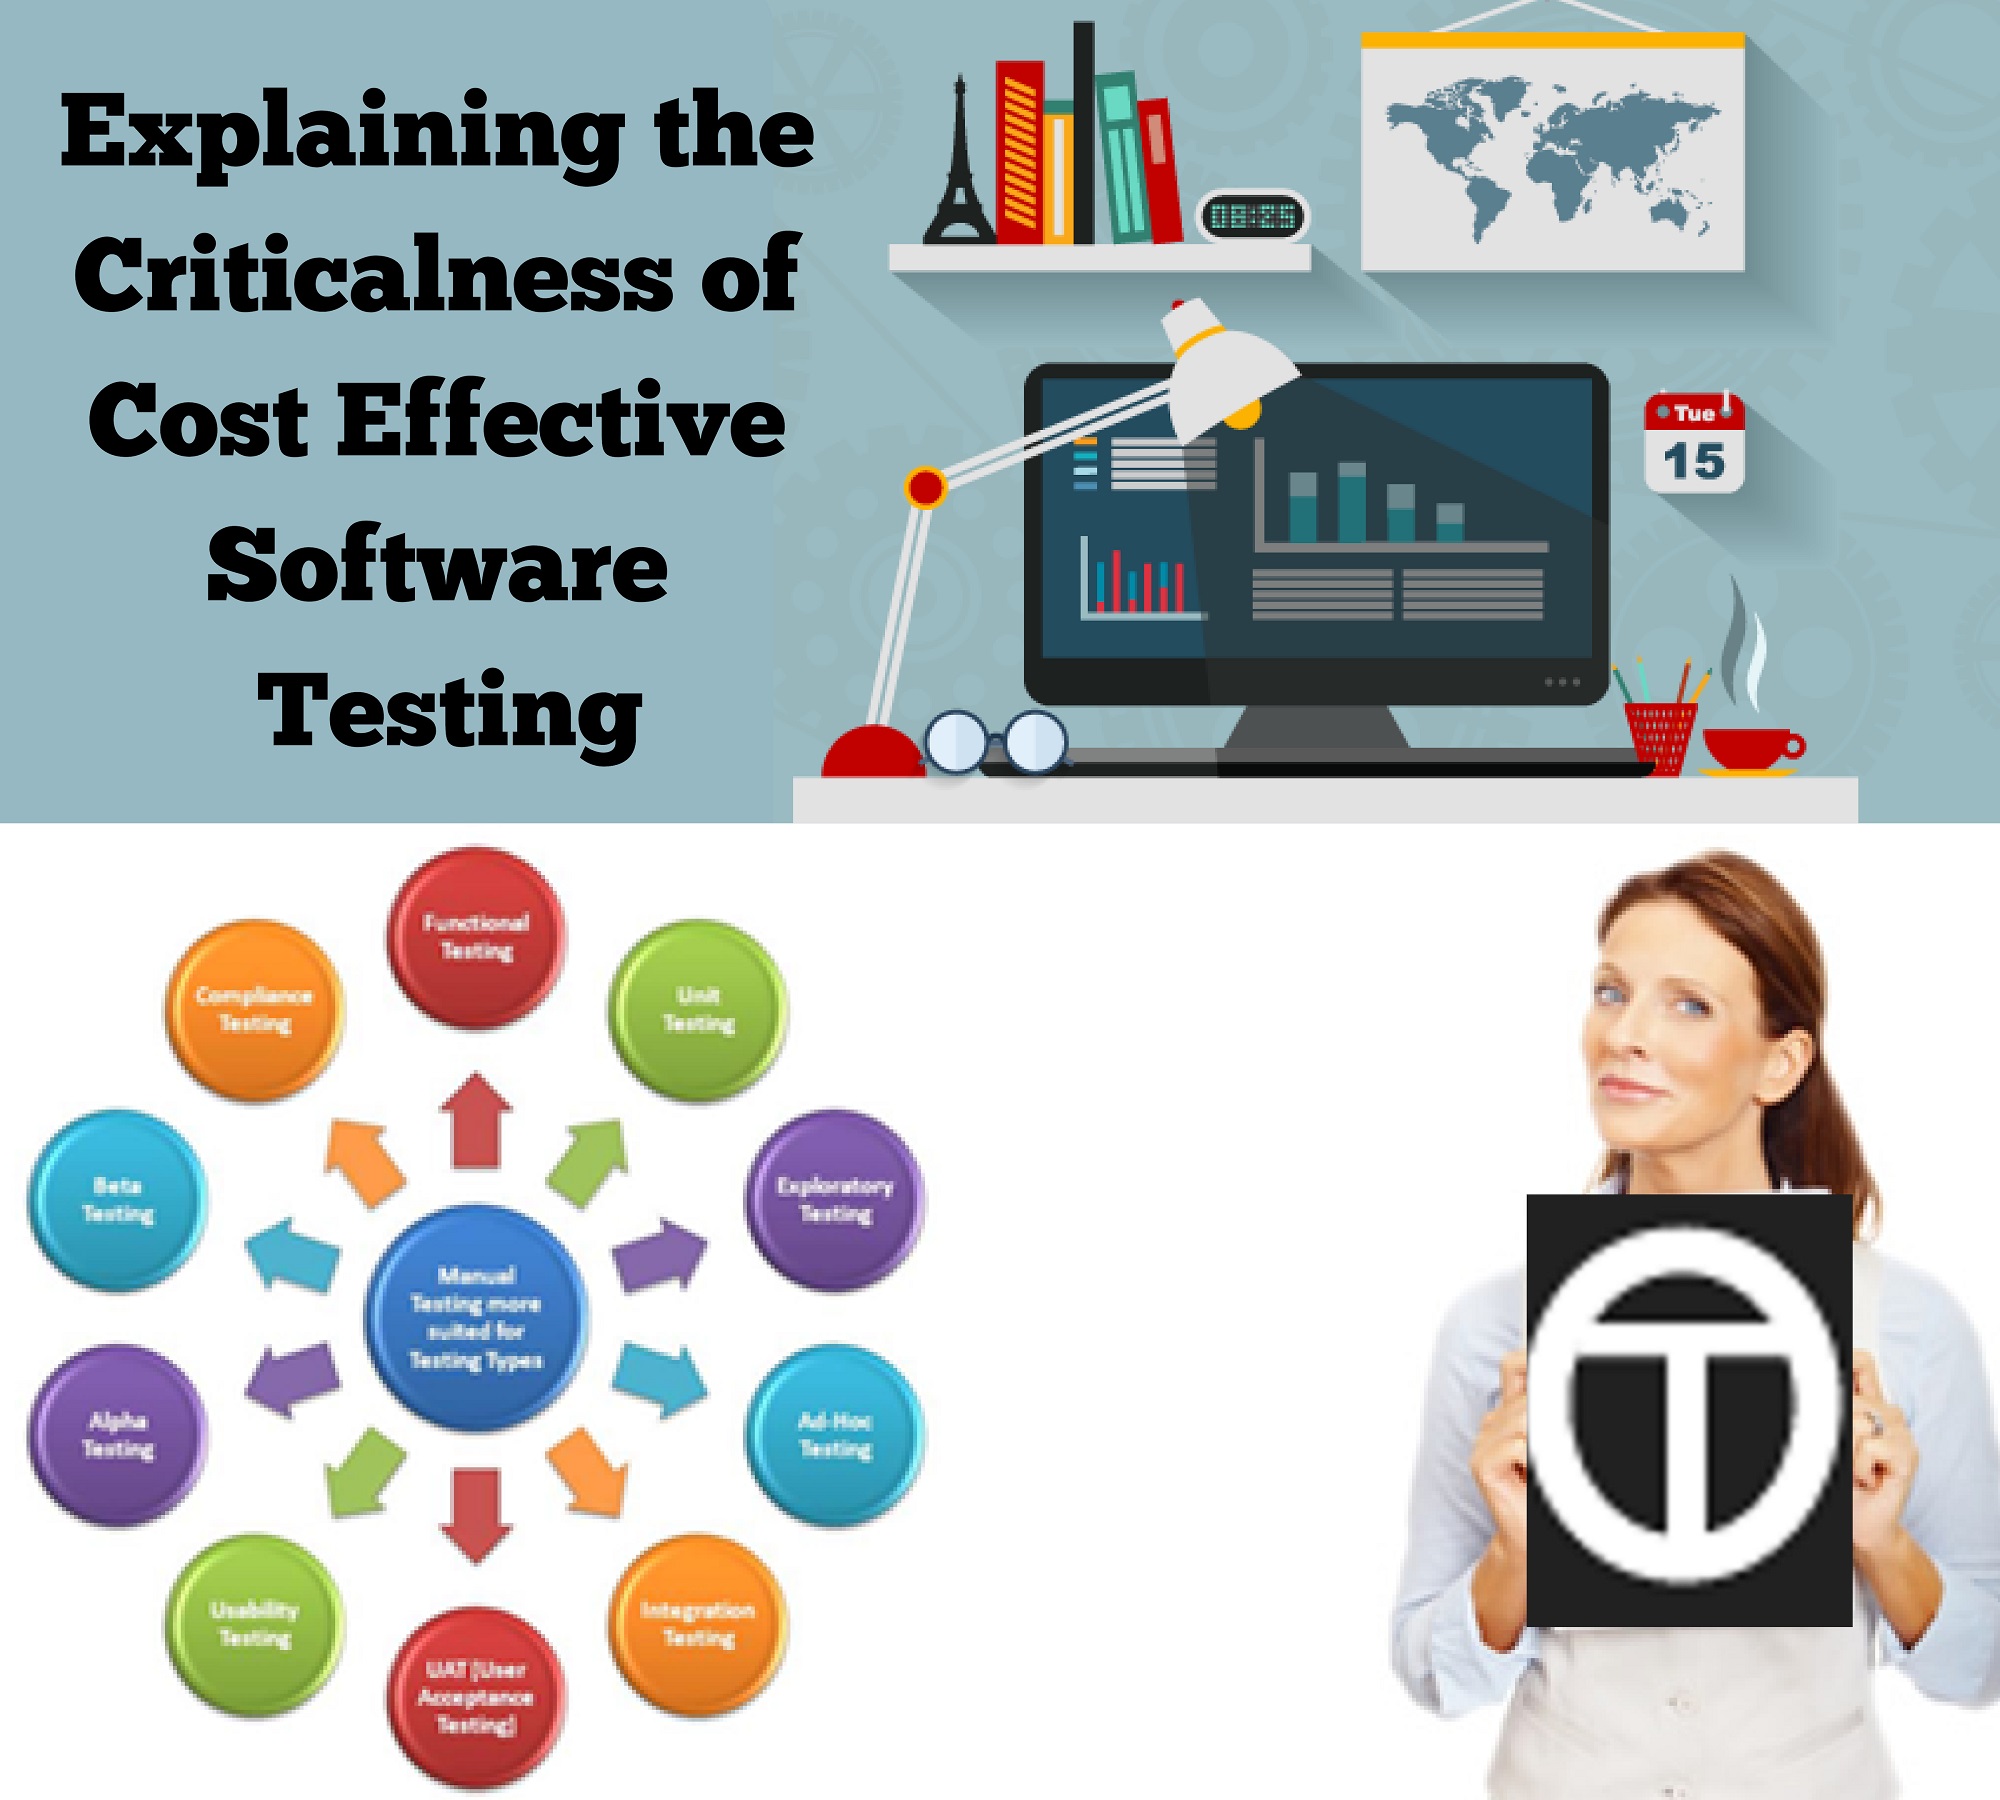 Explaining the Criticalness of Cost Effective Software Testing